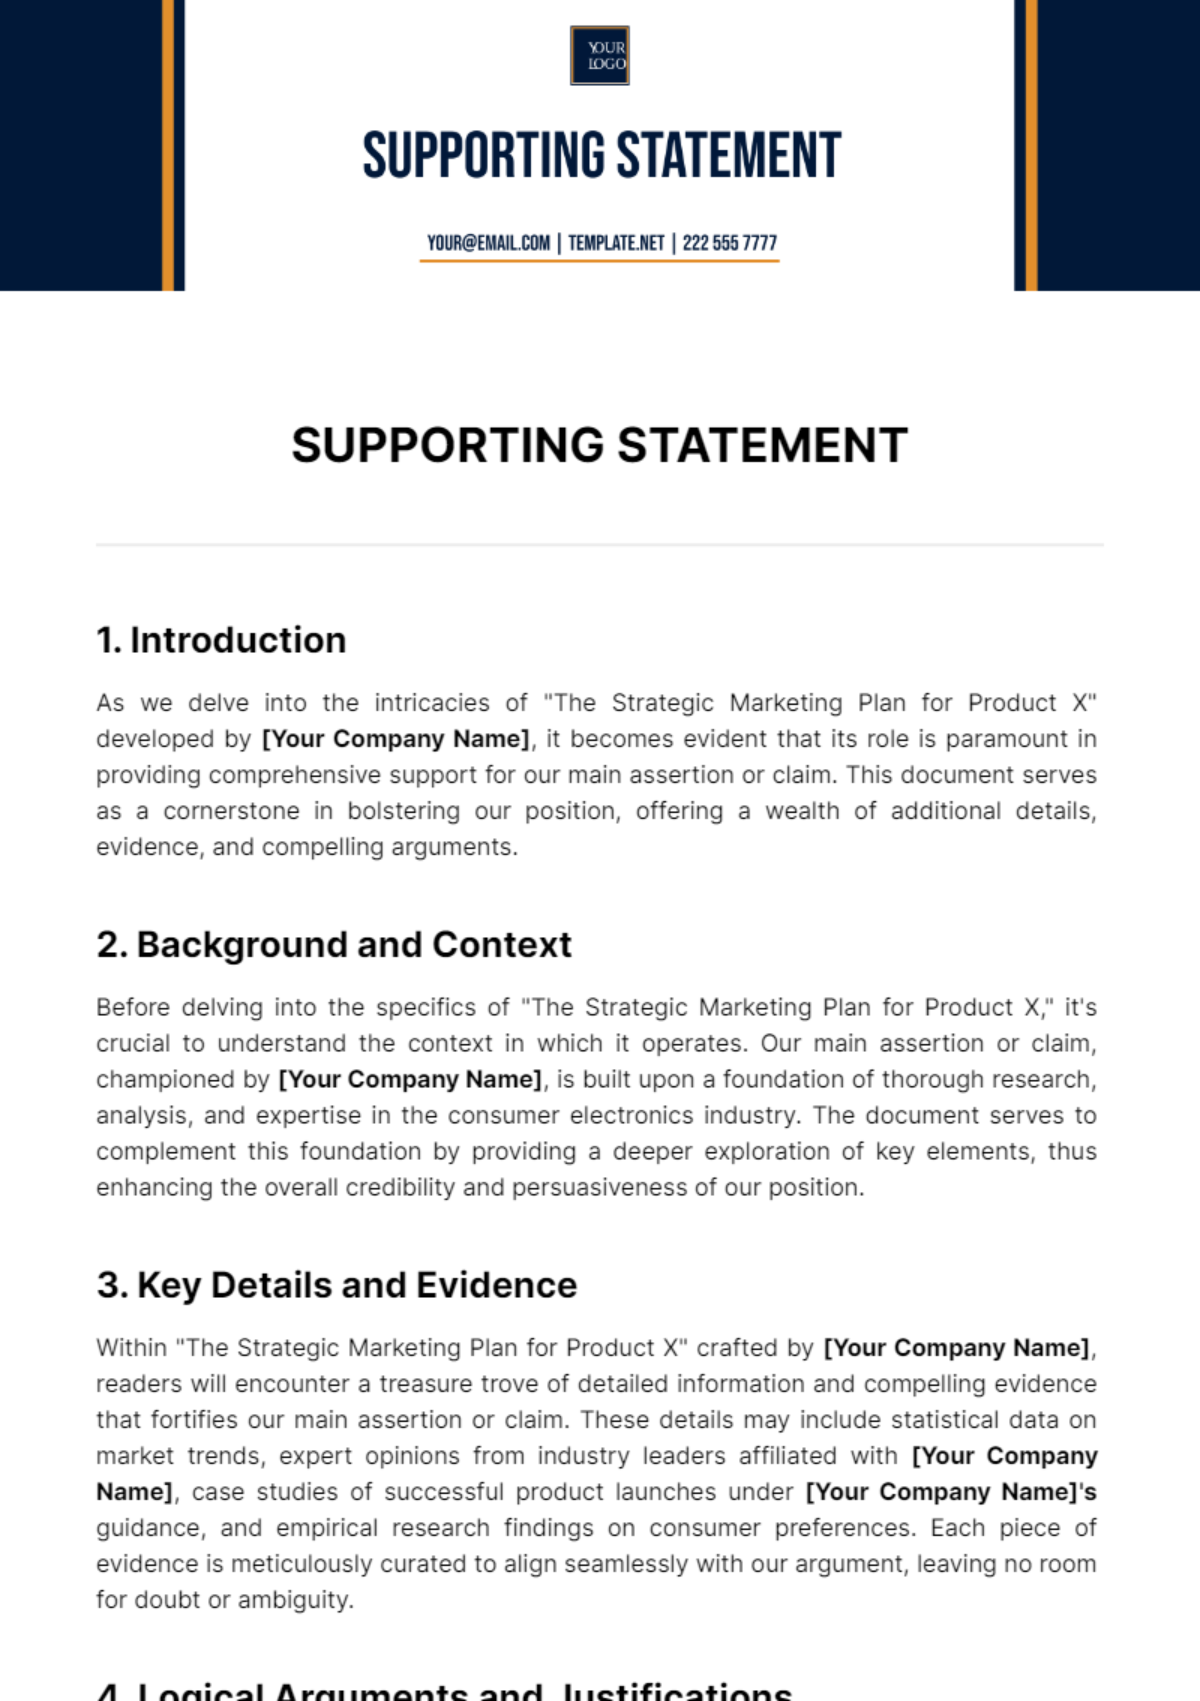 Supporting Statement Template